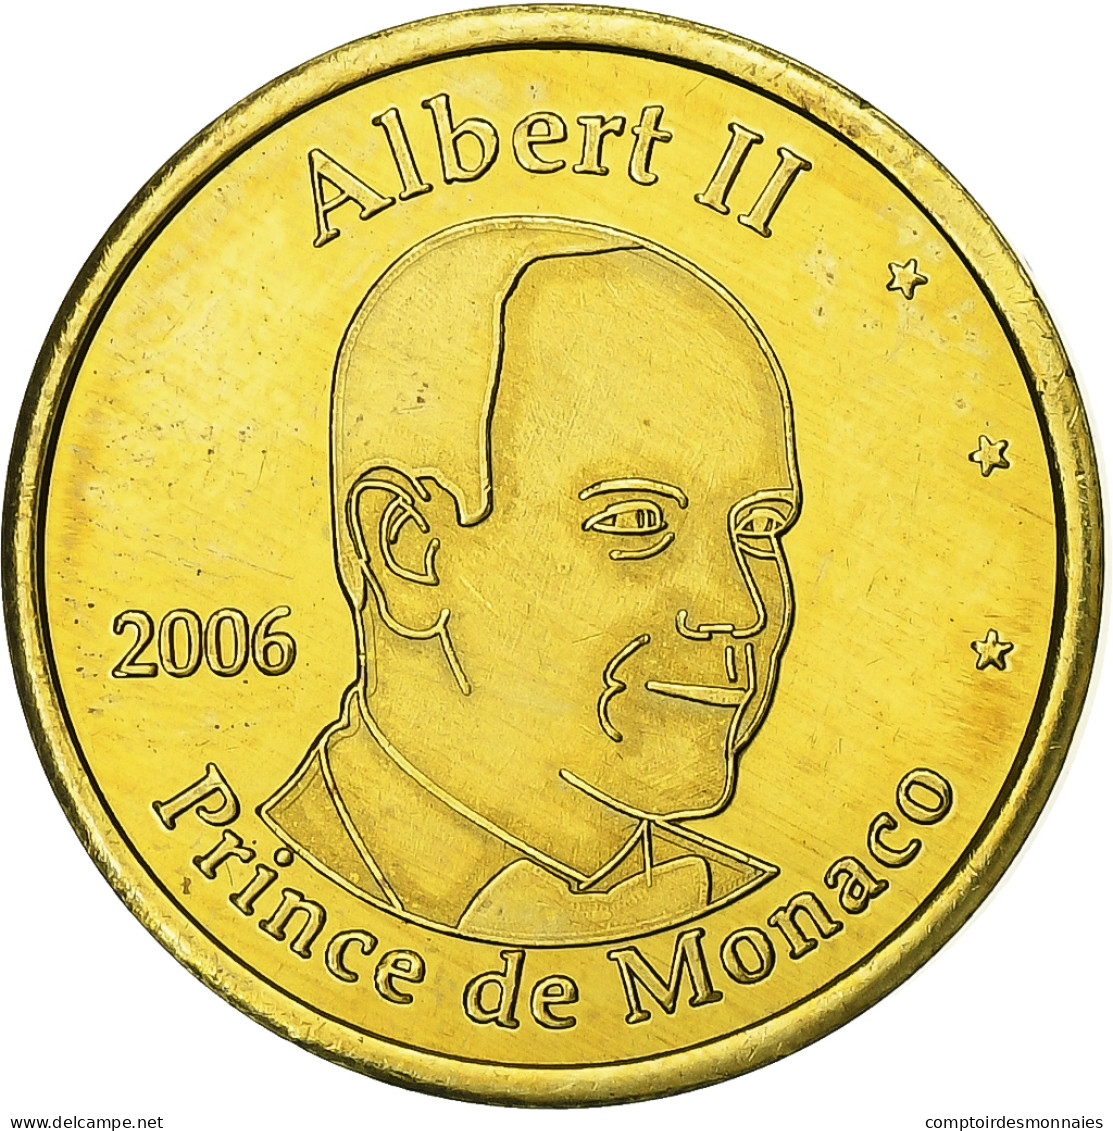 Monaco, 20 Euro Cent, Unofficial Private Coin, 2006, Laiton, SPL+ - Private Proofs / Unofficial